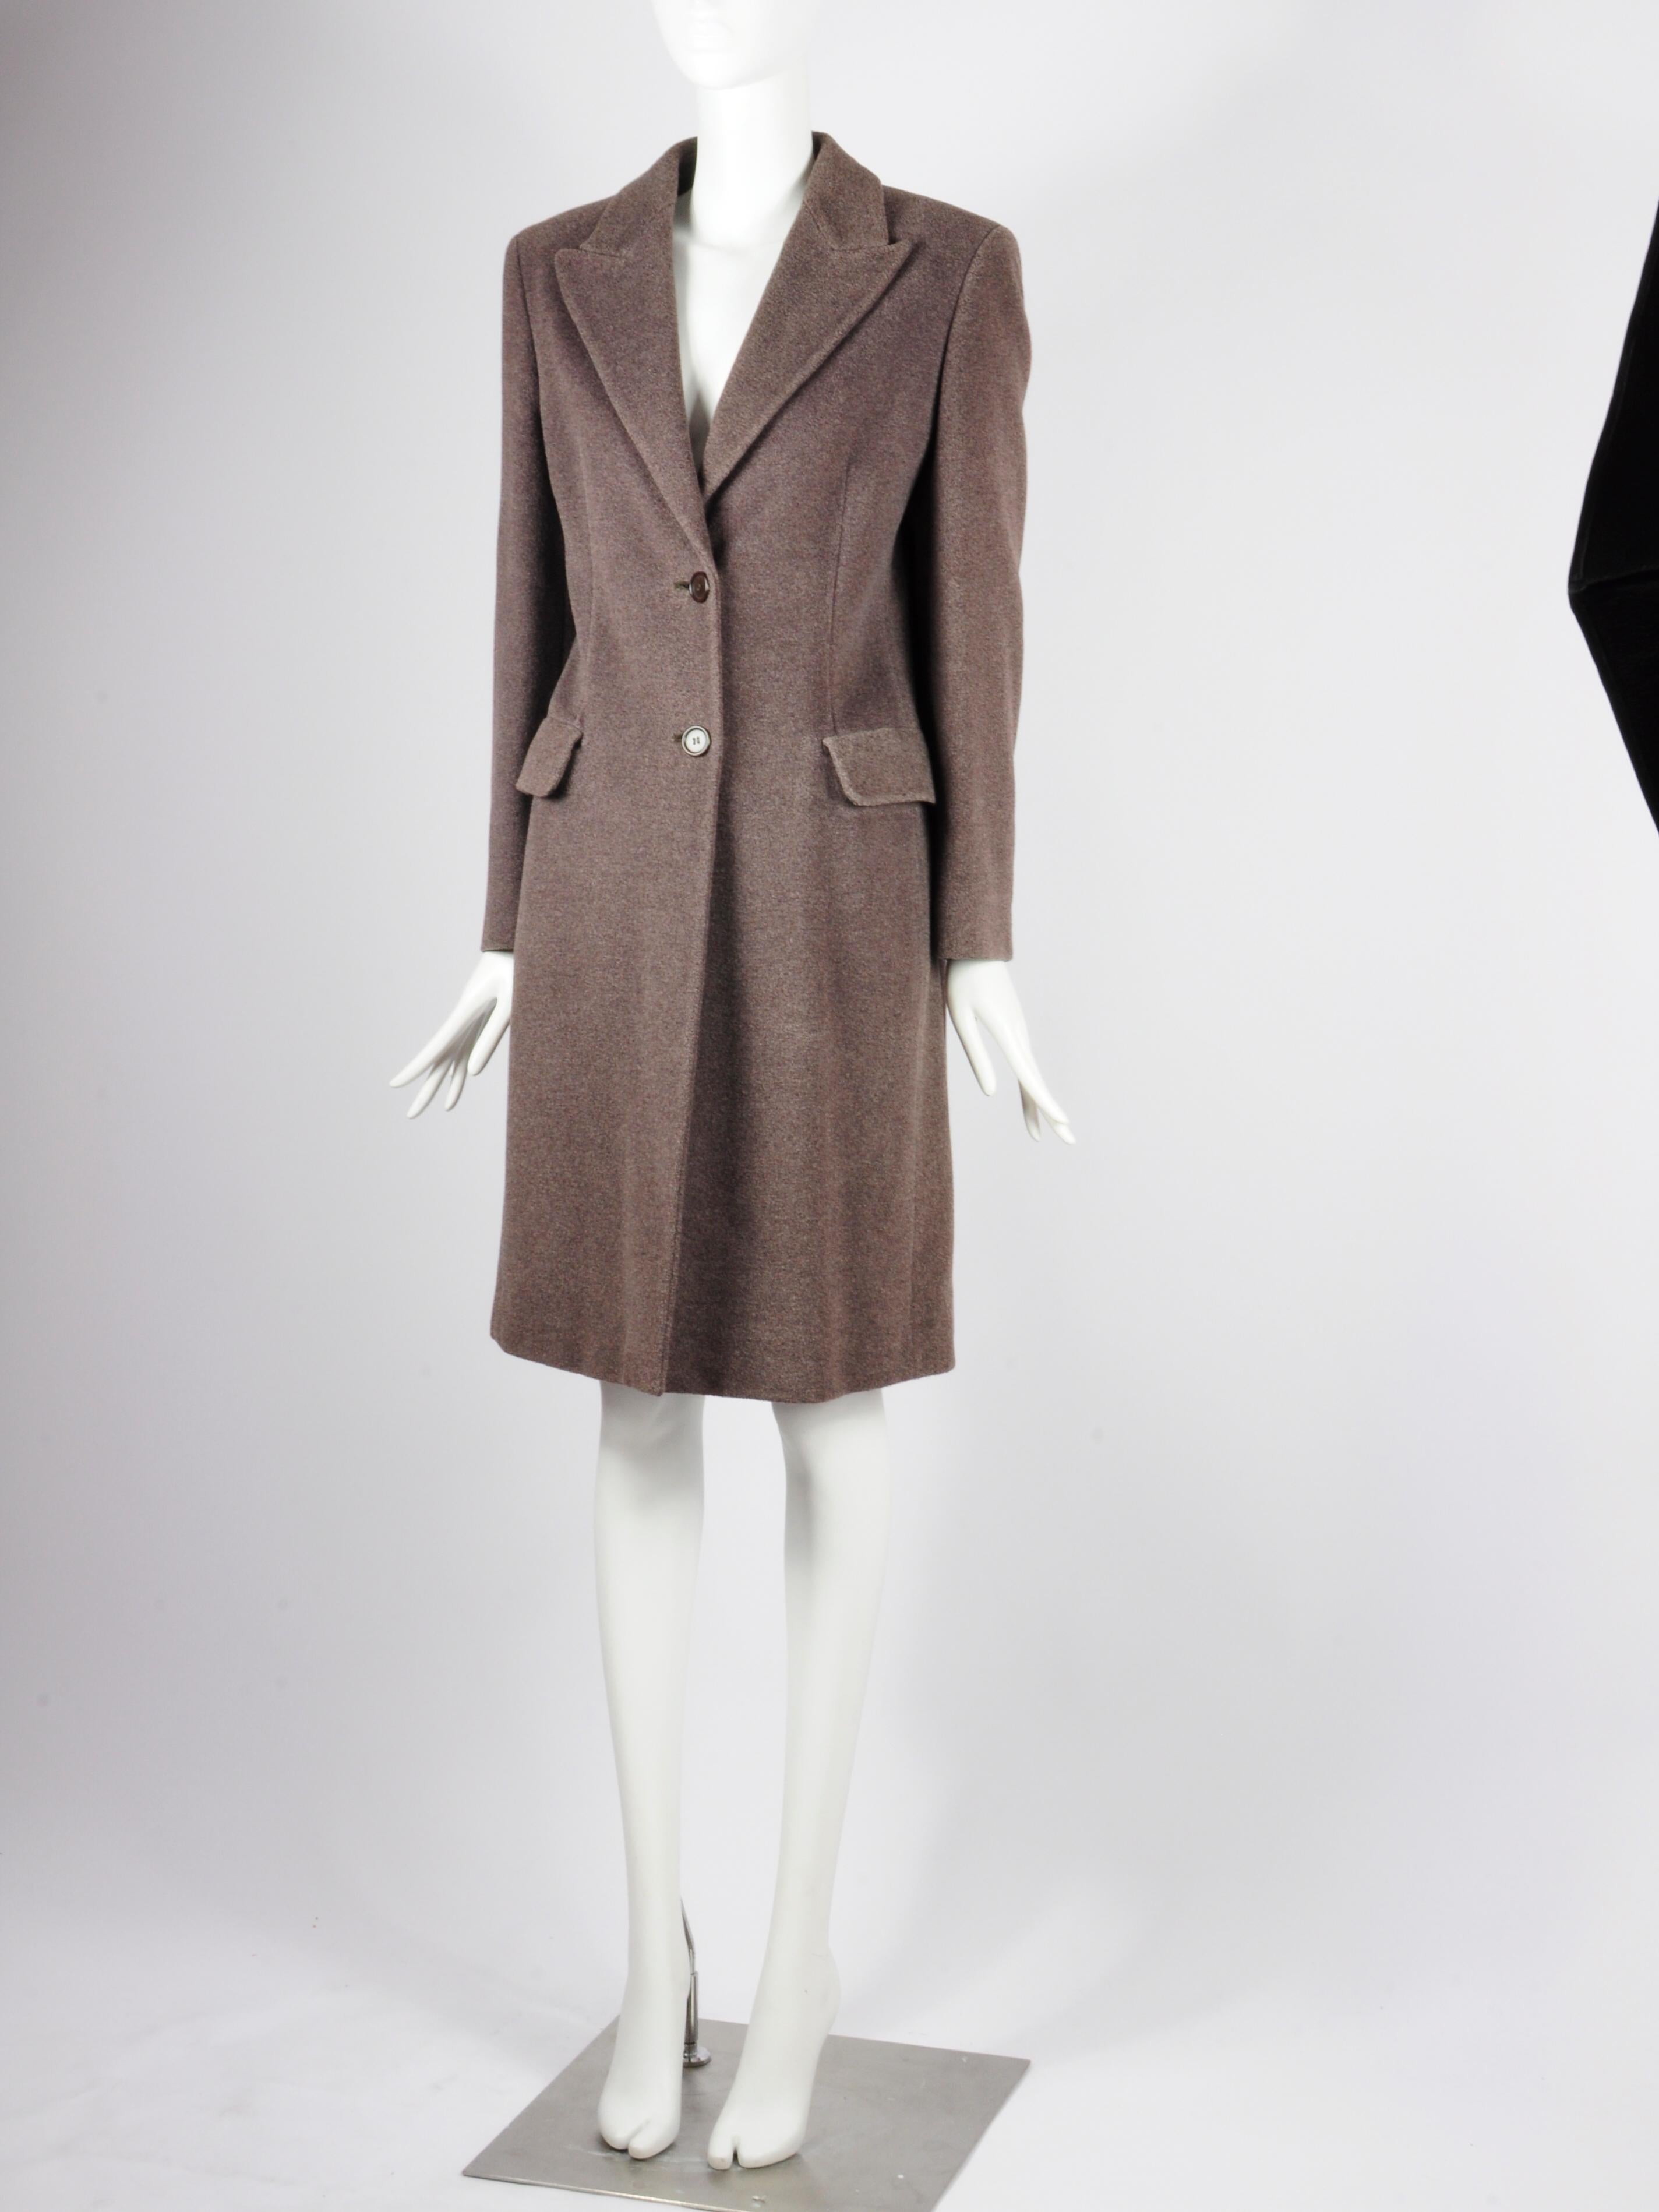 Max Mara light brown single breasted classic wool and silk coat from the 1990s. The tailoring on this Max Mara coat is very feminine and the fabric feels very soft due to the wool and silk blend. A Max Mara coat is a true italian classic.

BRAND